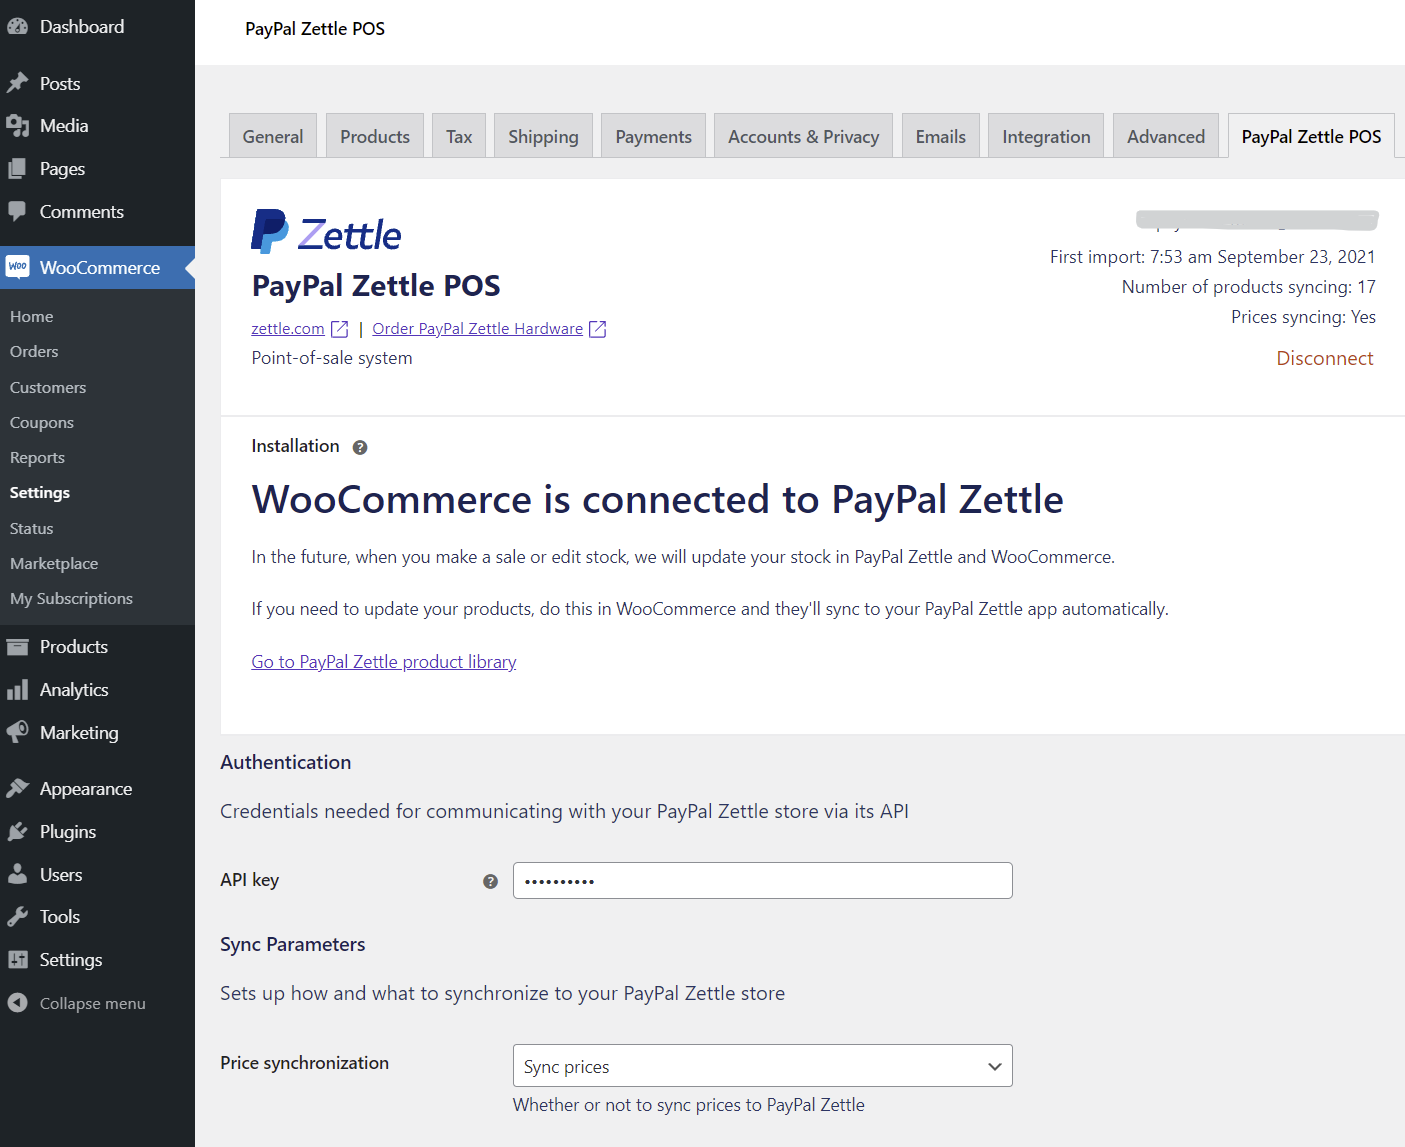 WooCommerce is connected to PayPal Zettle